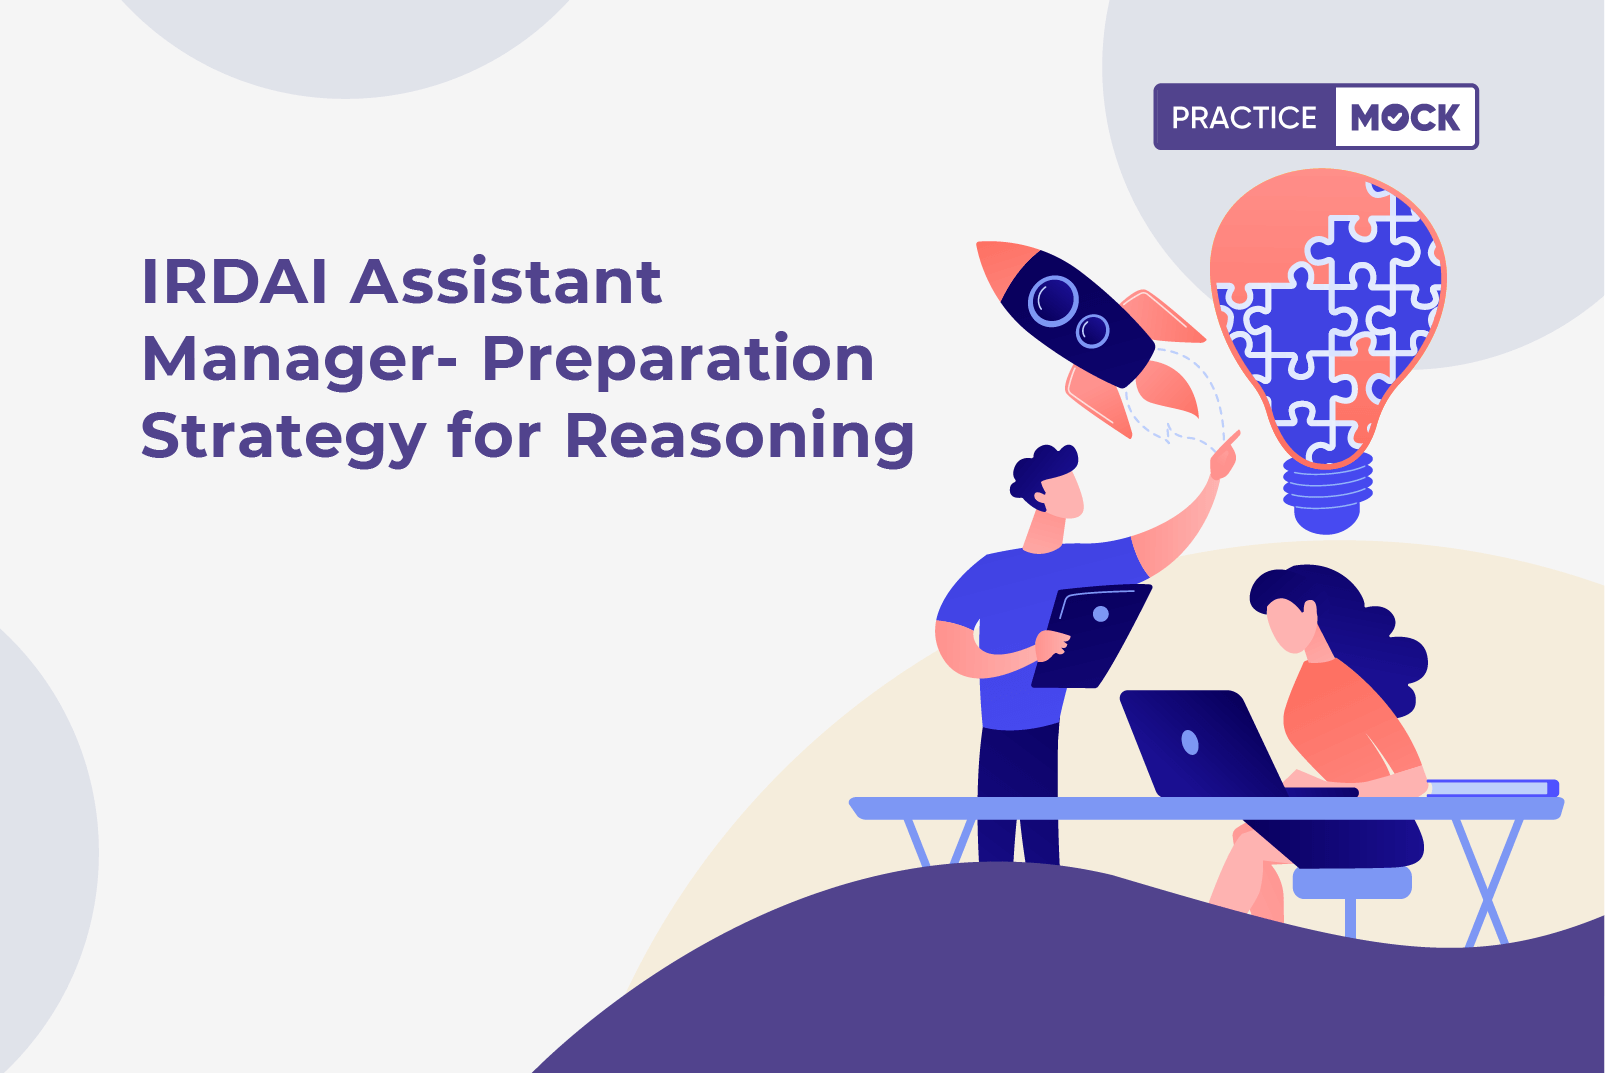 IRDAI Assistant Manager- Preparation Strategy for Reasoning